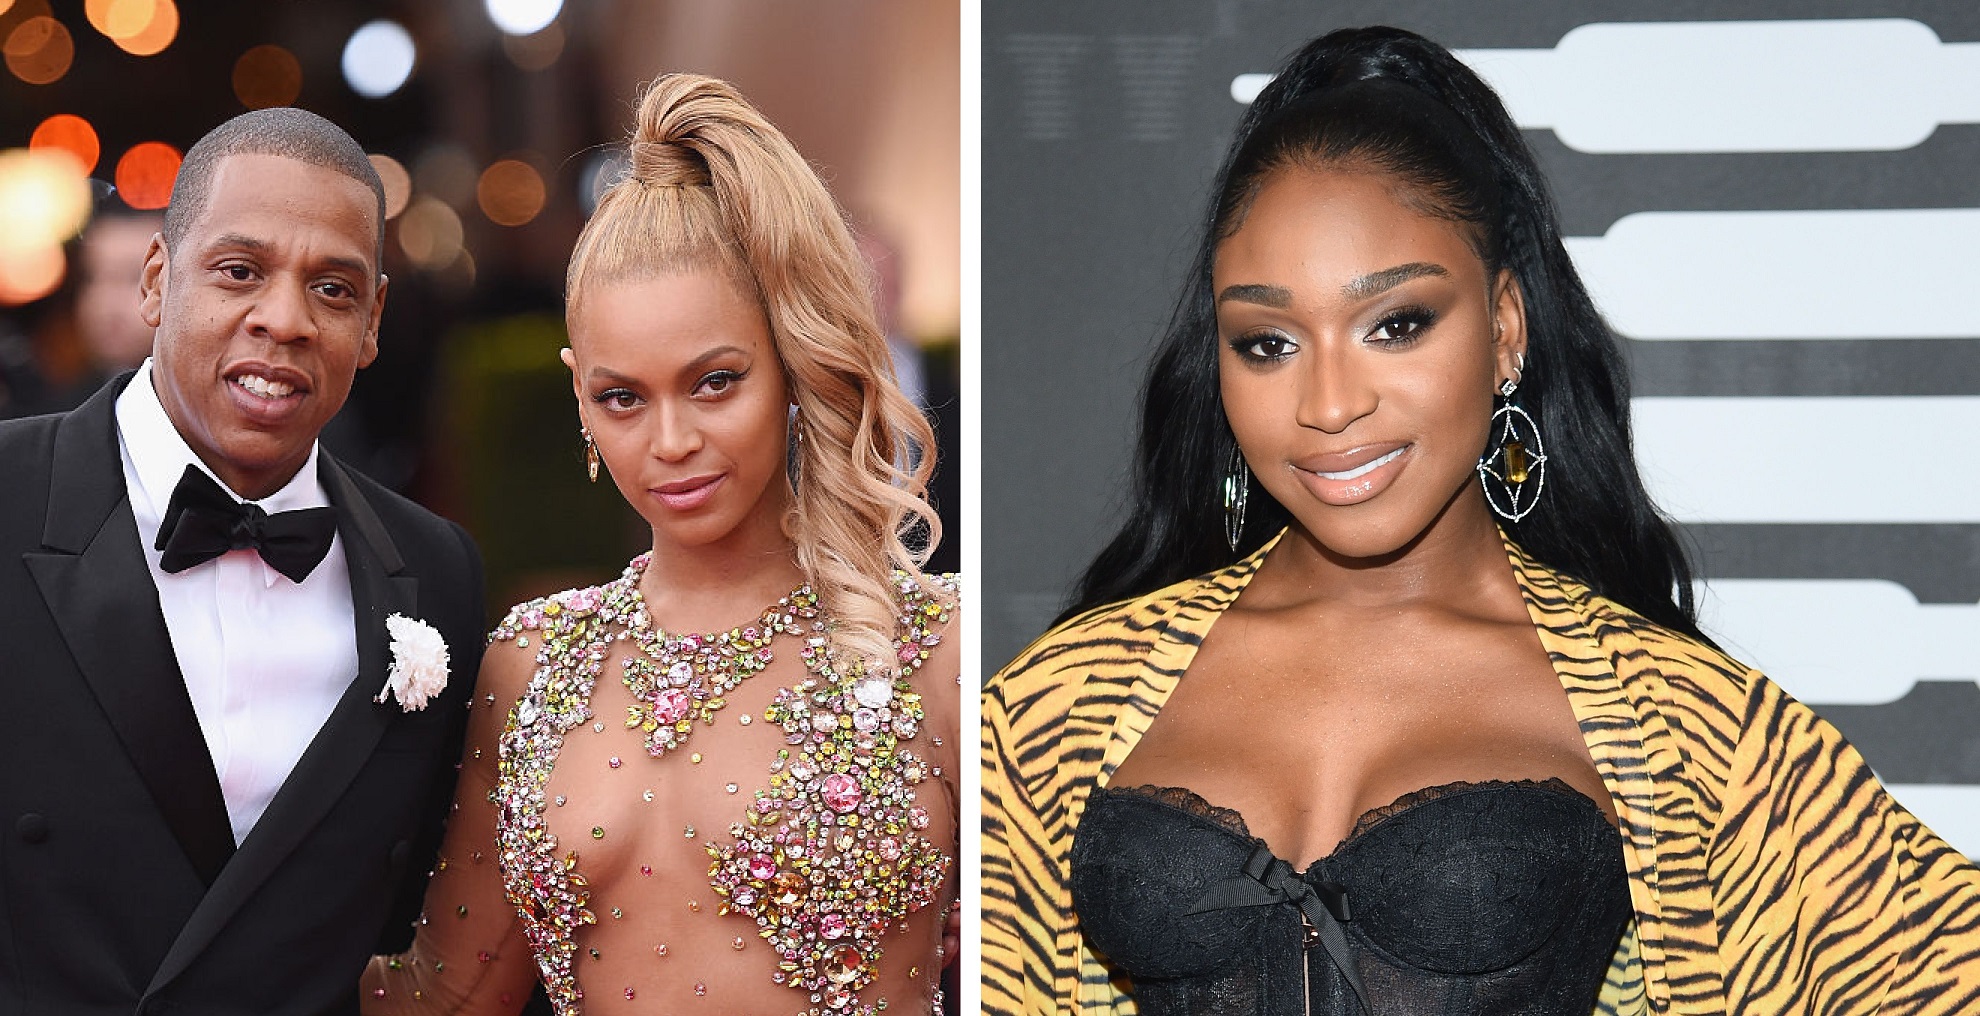 Normani Says She’s Got Support From Jay Z & Beyonce, “They Want Me To Win”